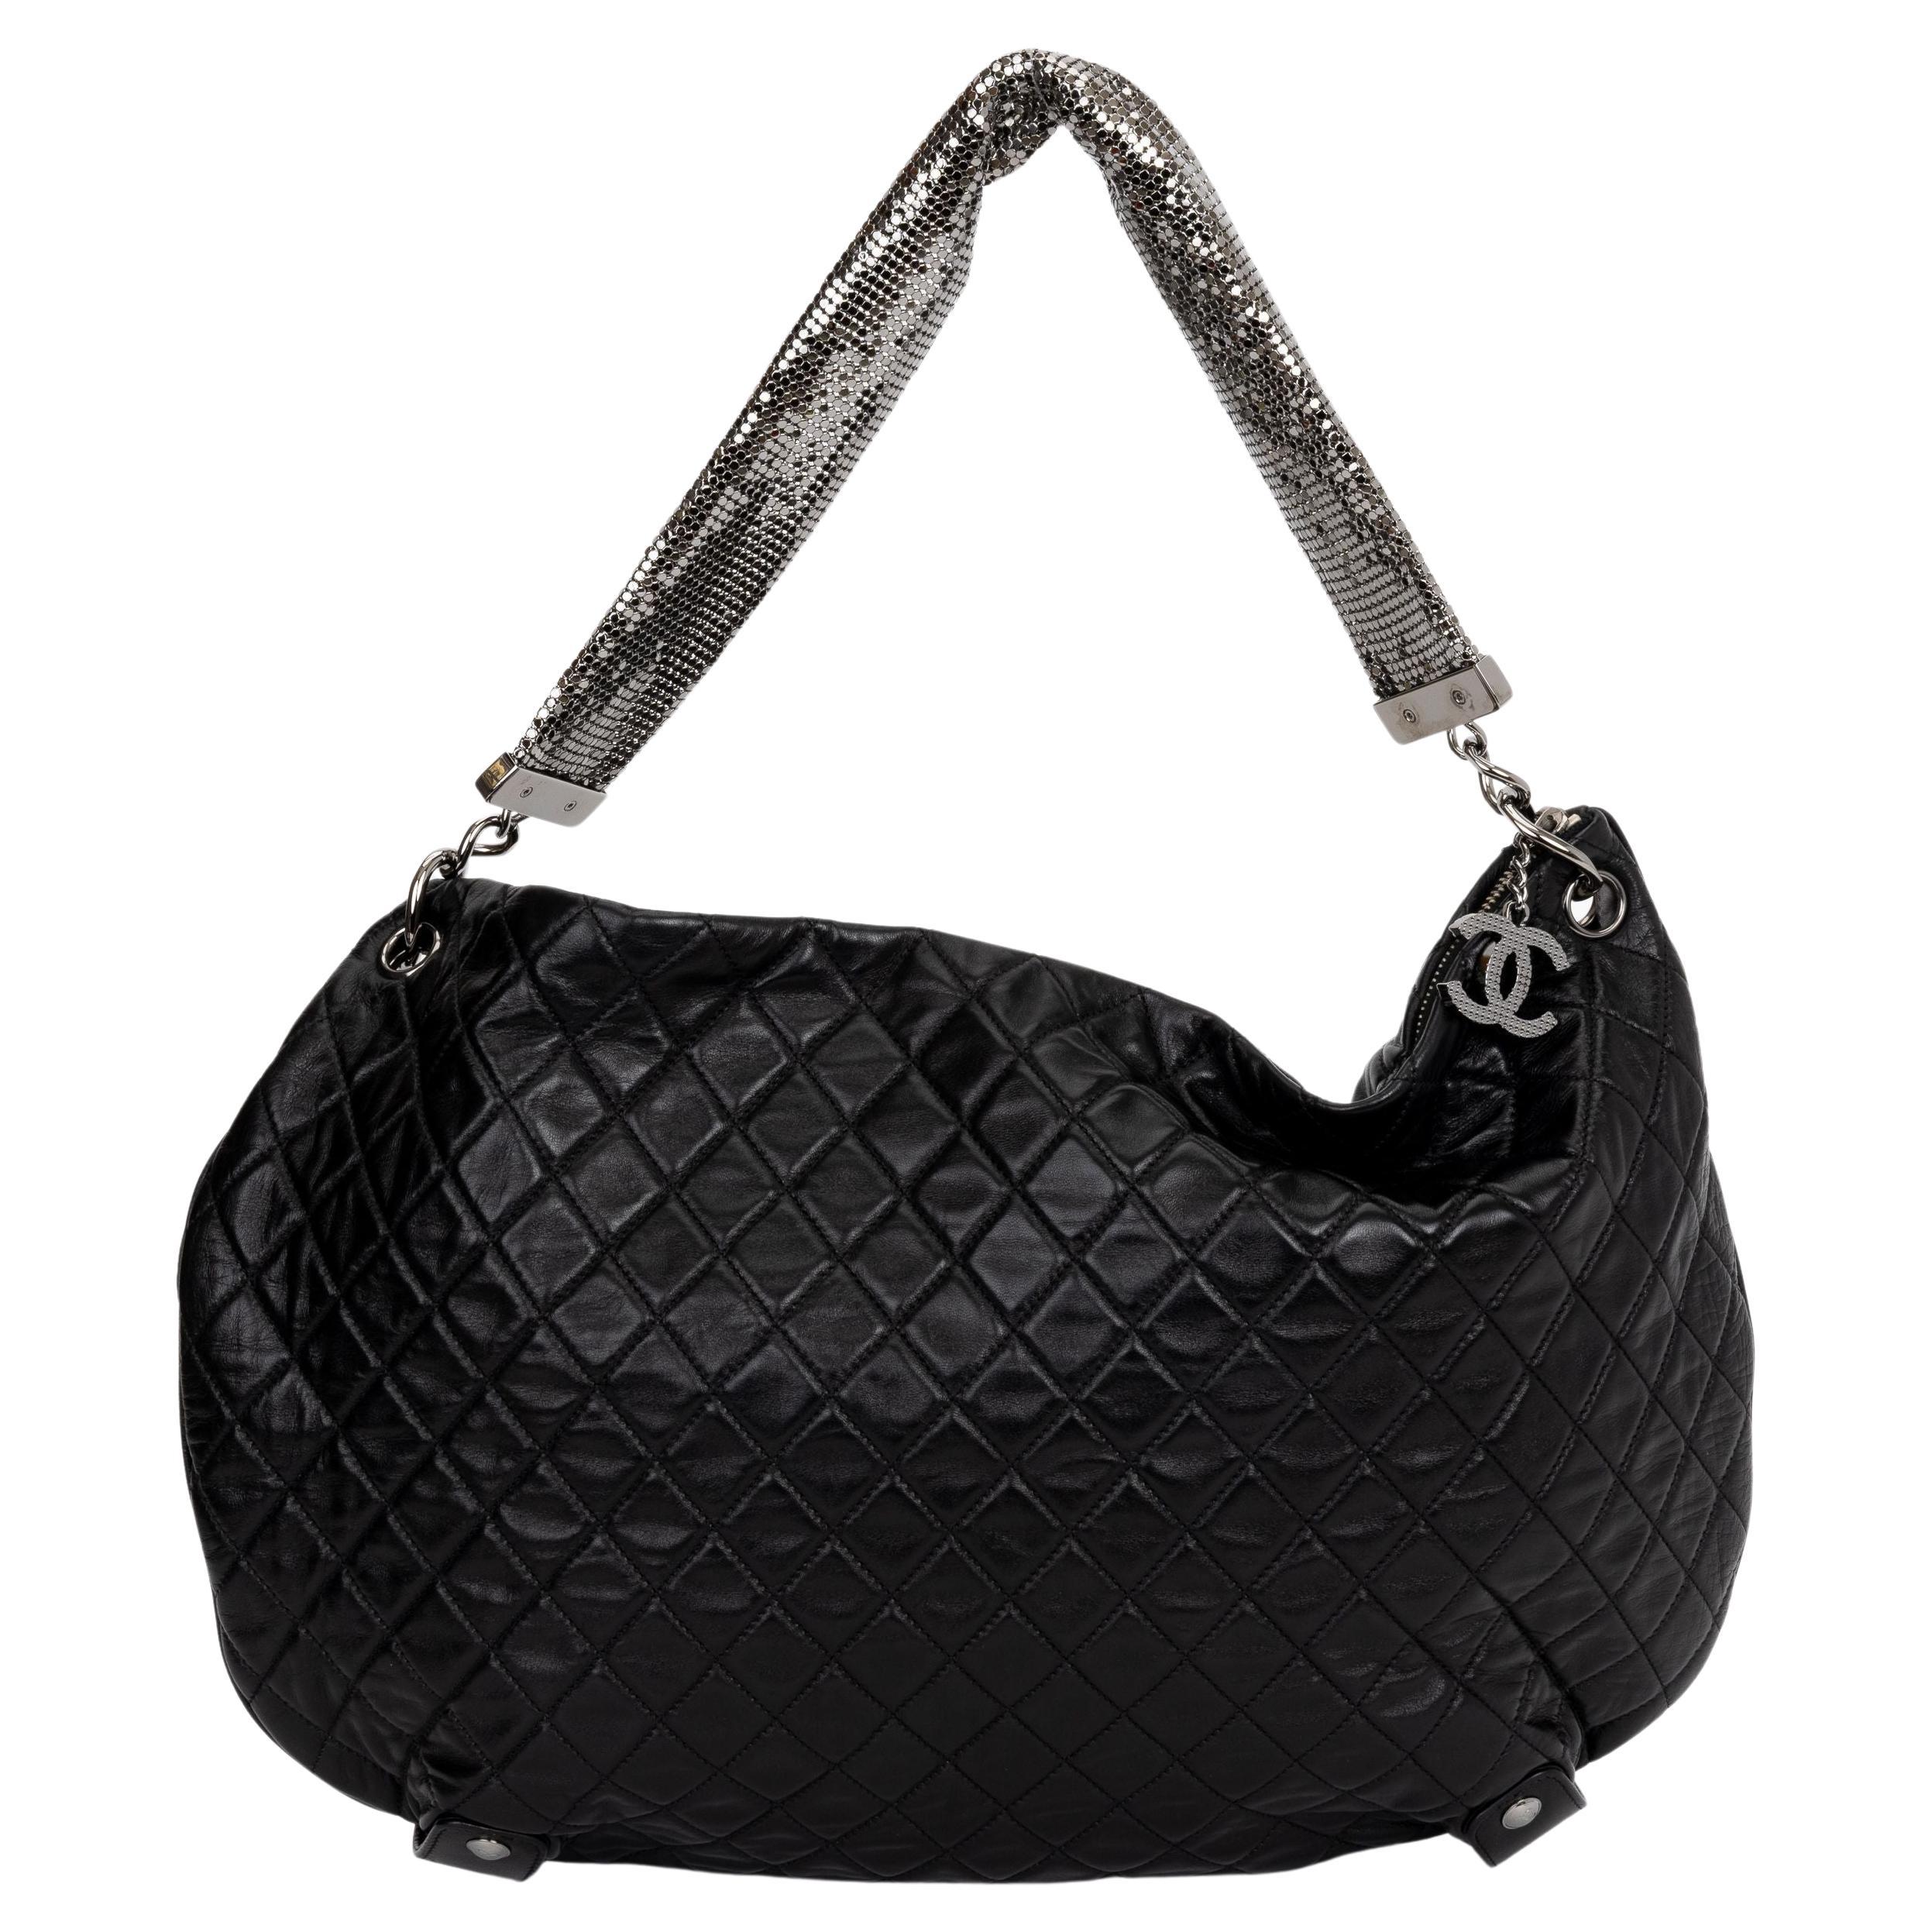 Chanel Black Mesh Chain Mail Bag For Sale